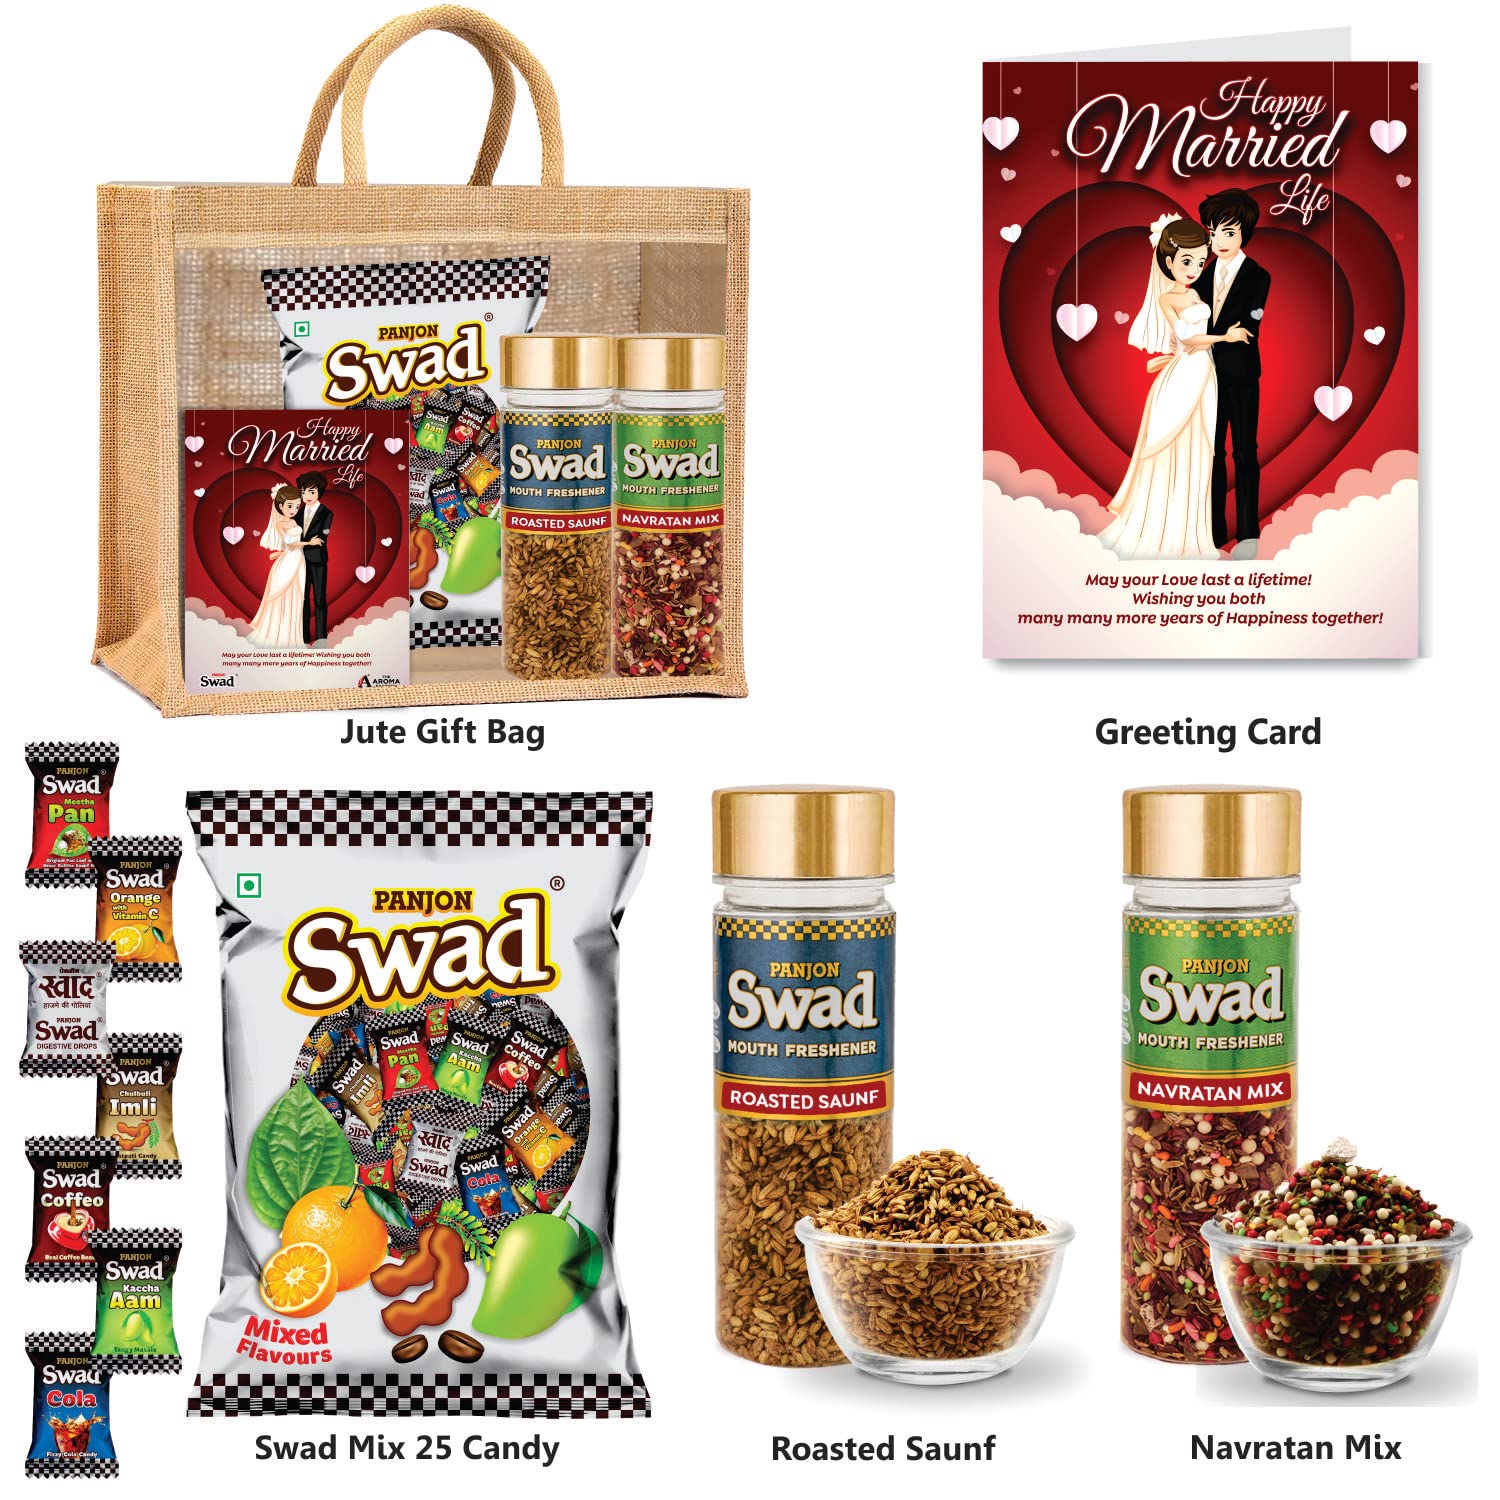 Swad Happy Married Life Gift Hamper Set (Mixed Toffee & Rosted Saunf & Shahi Navaratan Pachak Mukhwas Mouthfreshener, 25 Candy & 2 bottle) with Greeting Card & Jute Bag,Gift Item